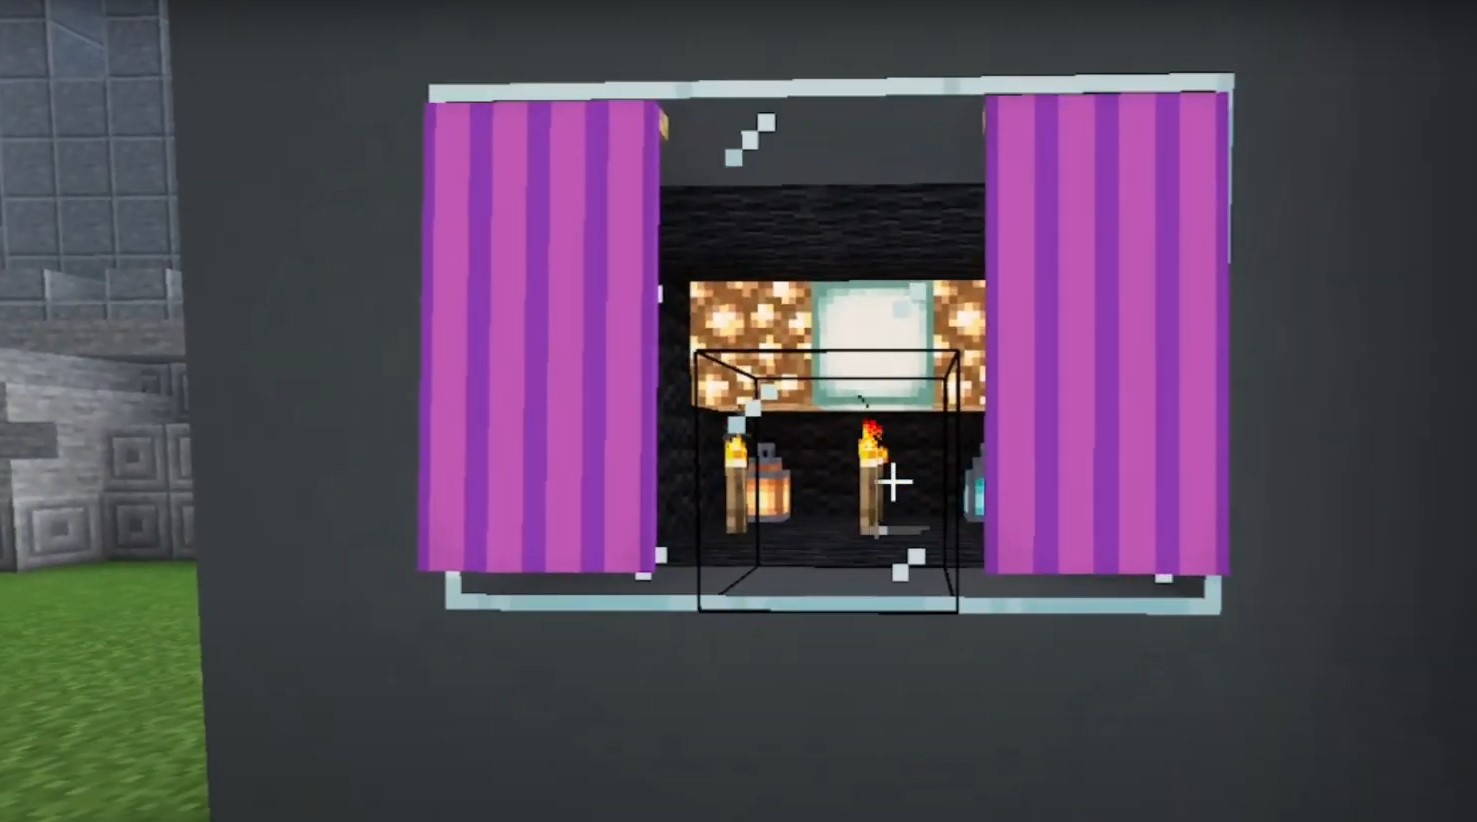 Minecraft curtains explained - pink curtains on window